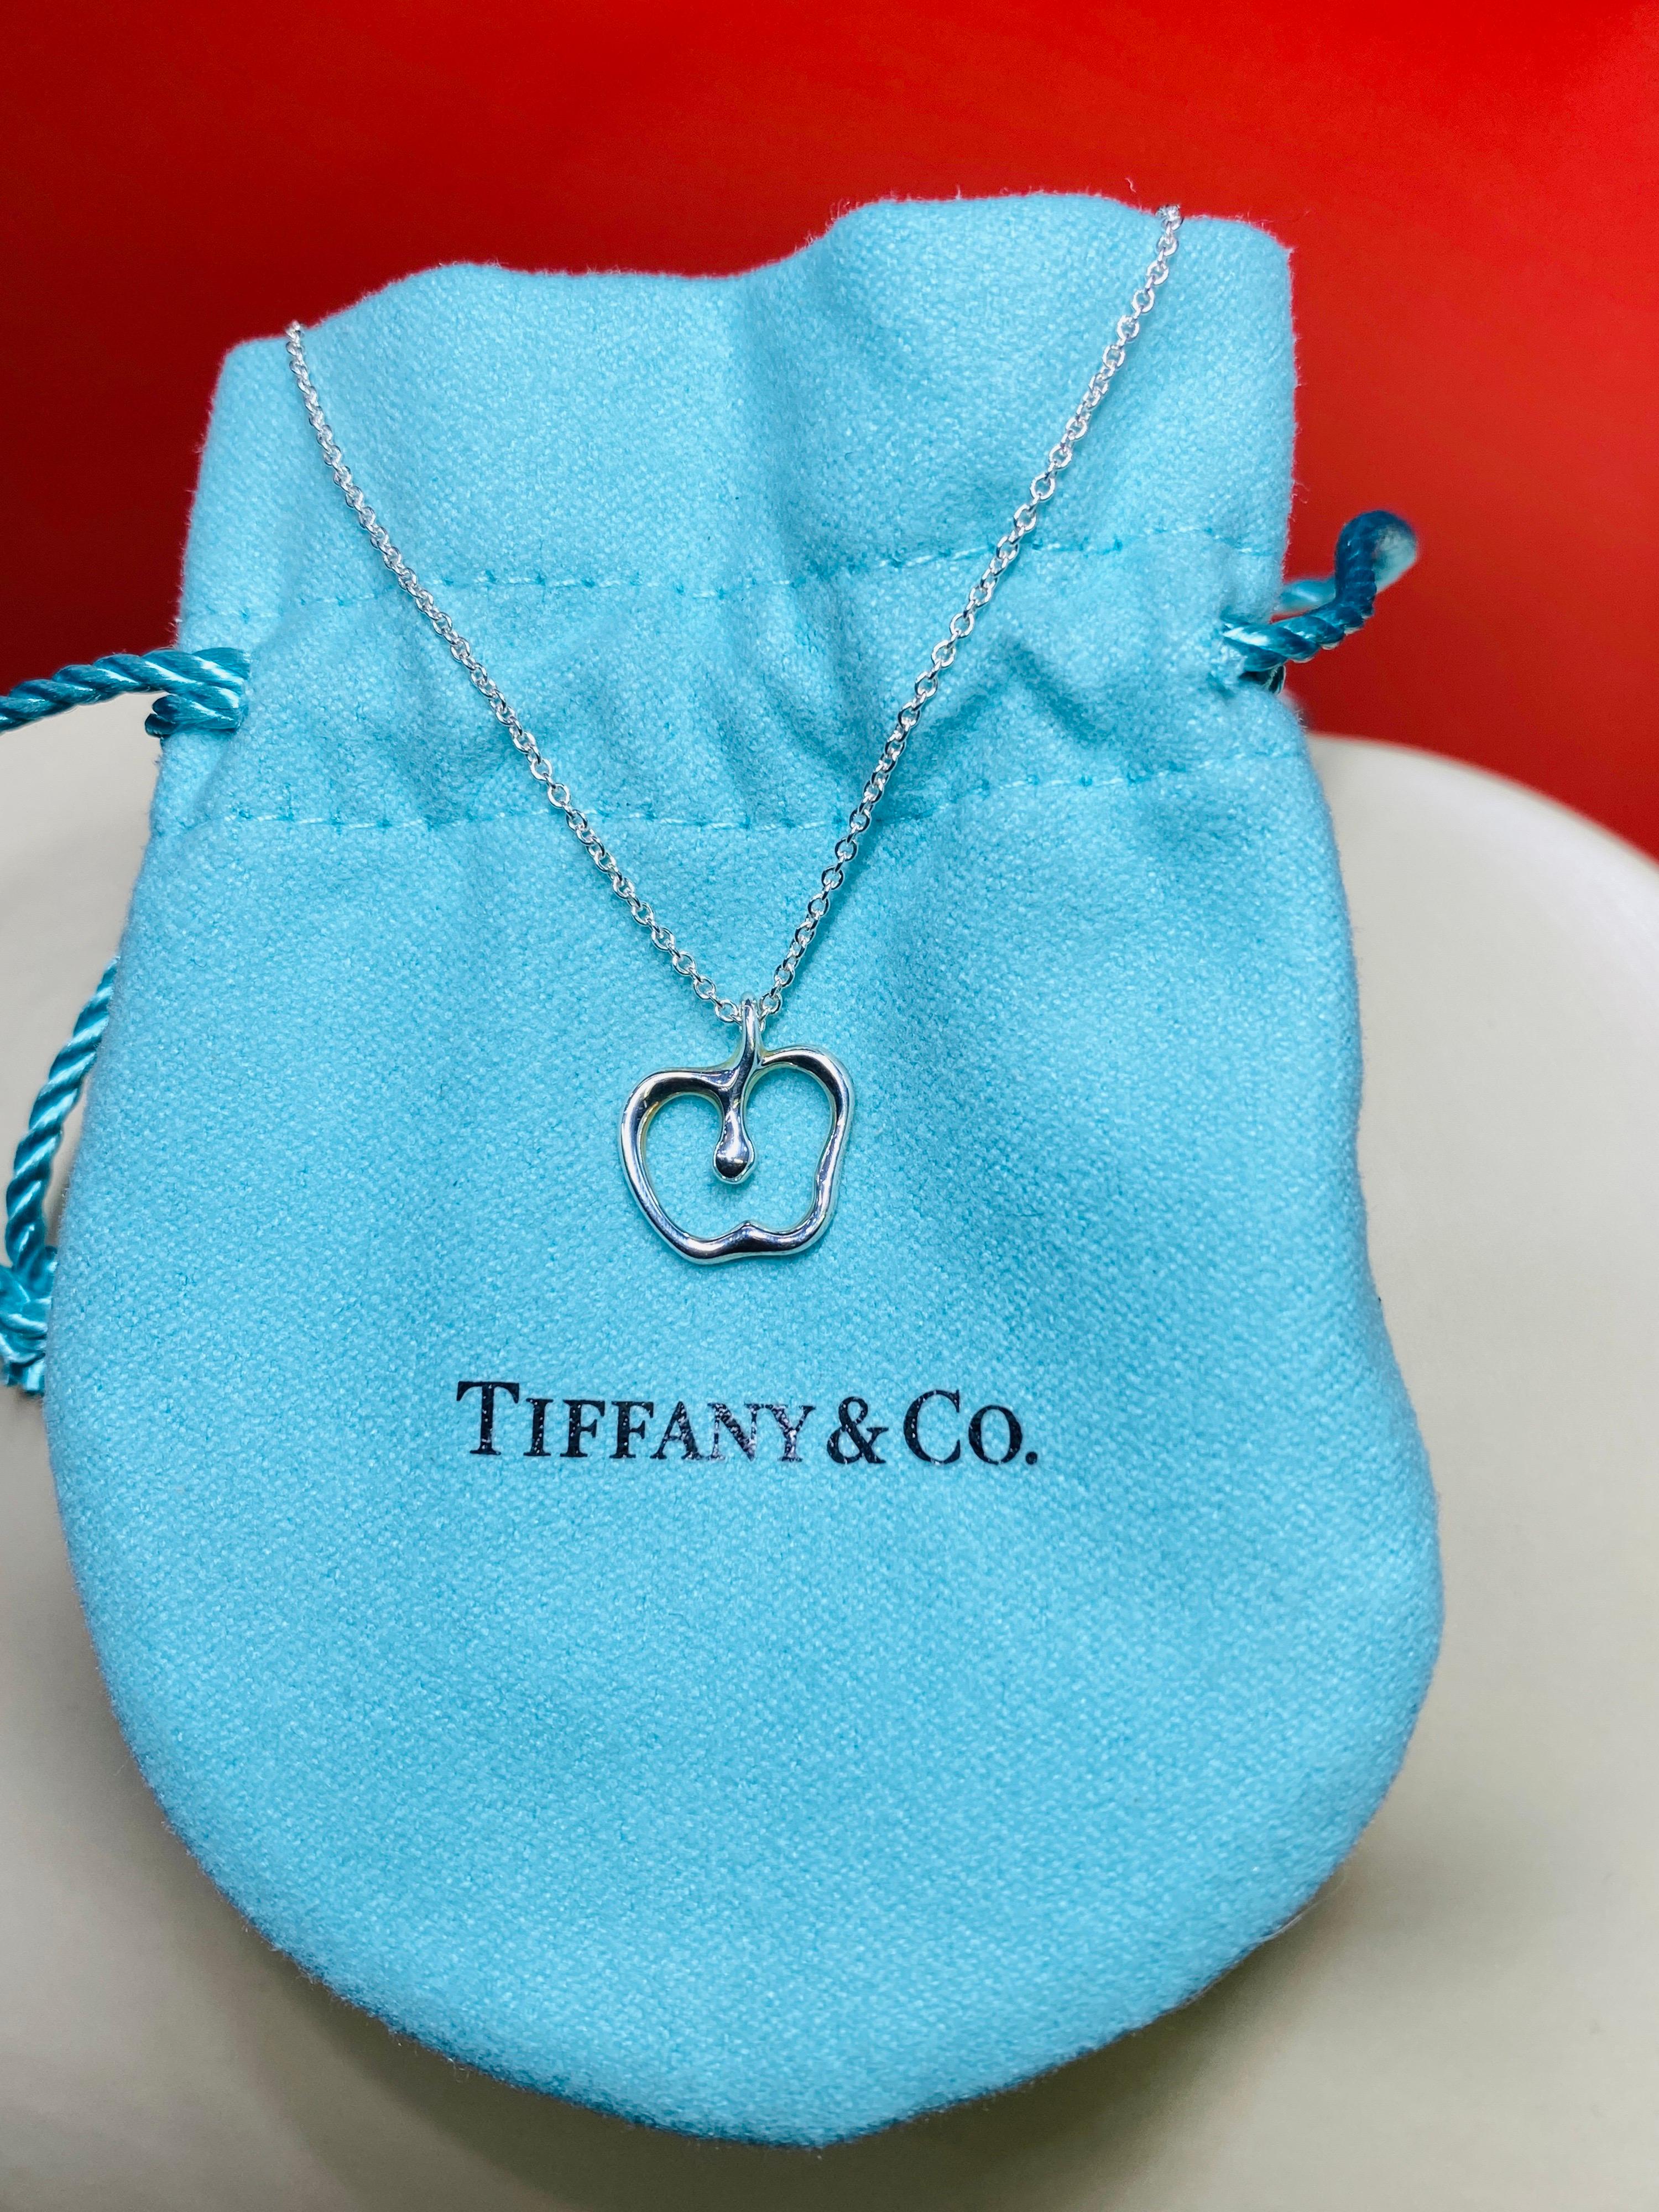 Tiffany & Co 925 sterling silver apple pendant and 16” chain designed by Else Peretti. 1.4Dwt